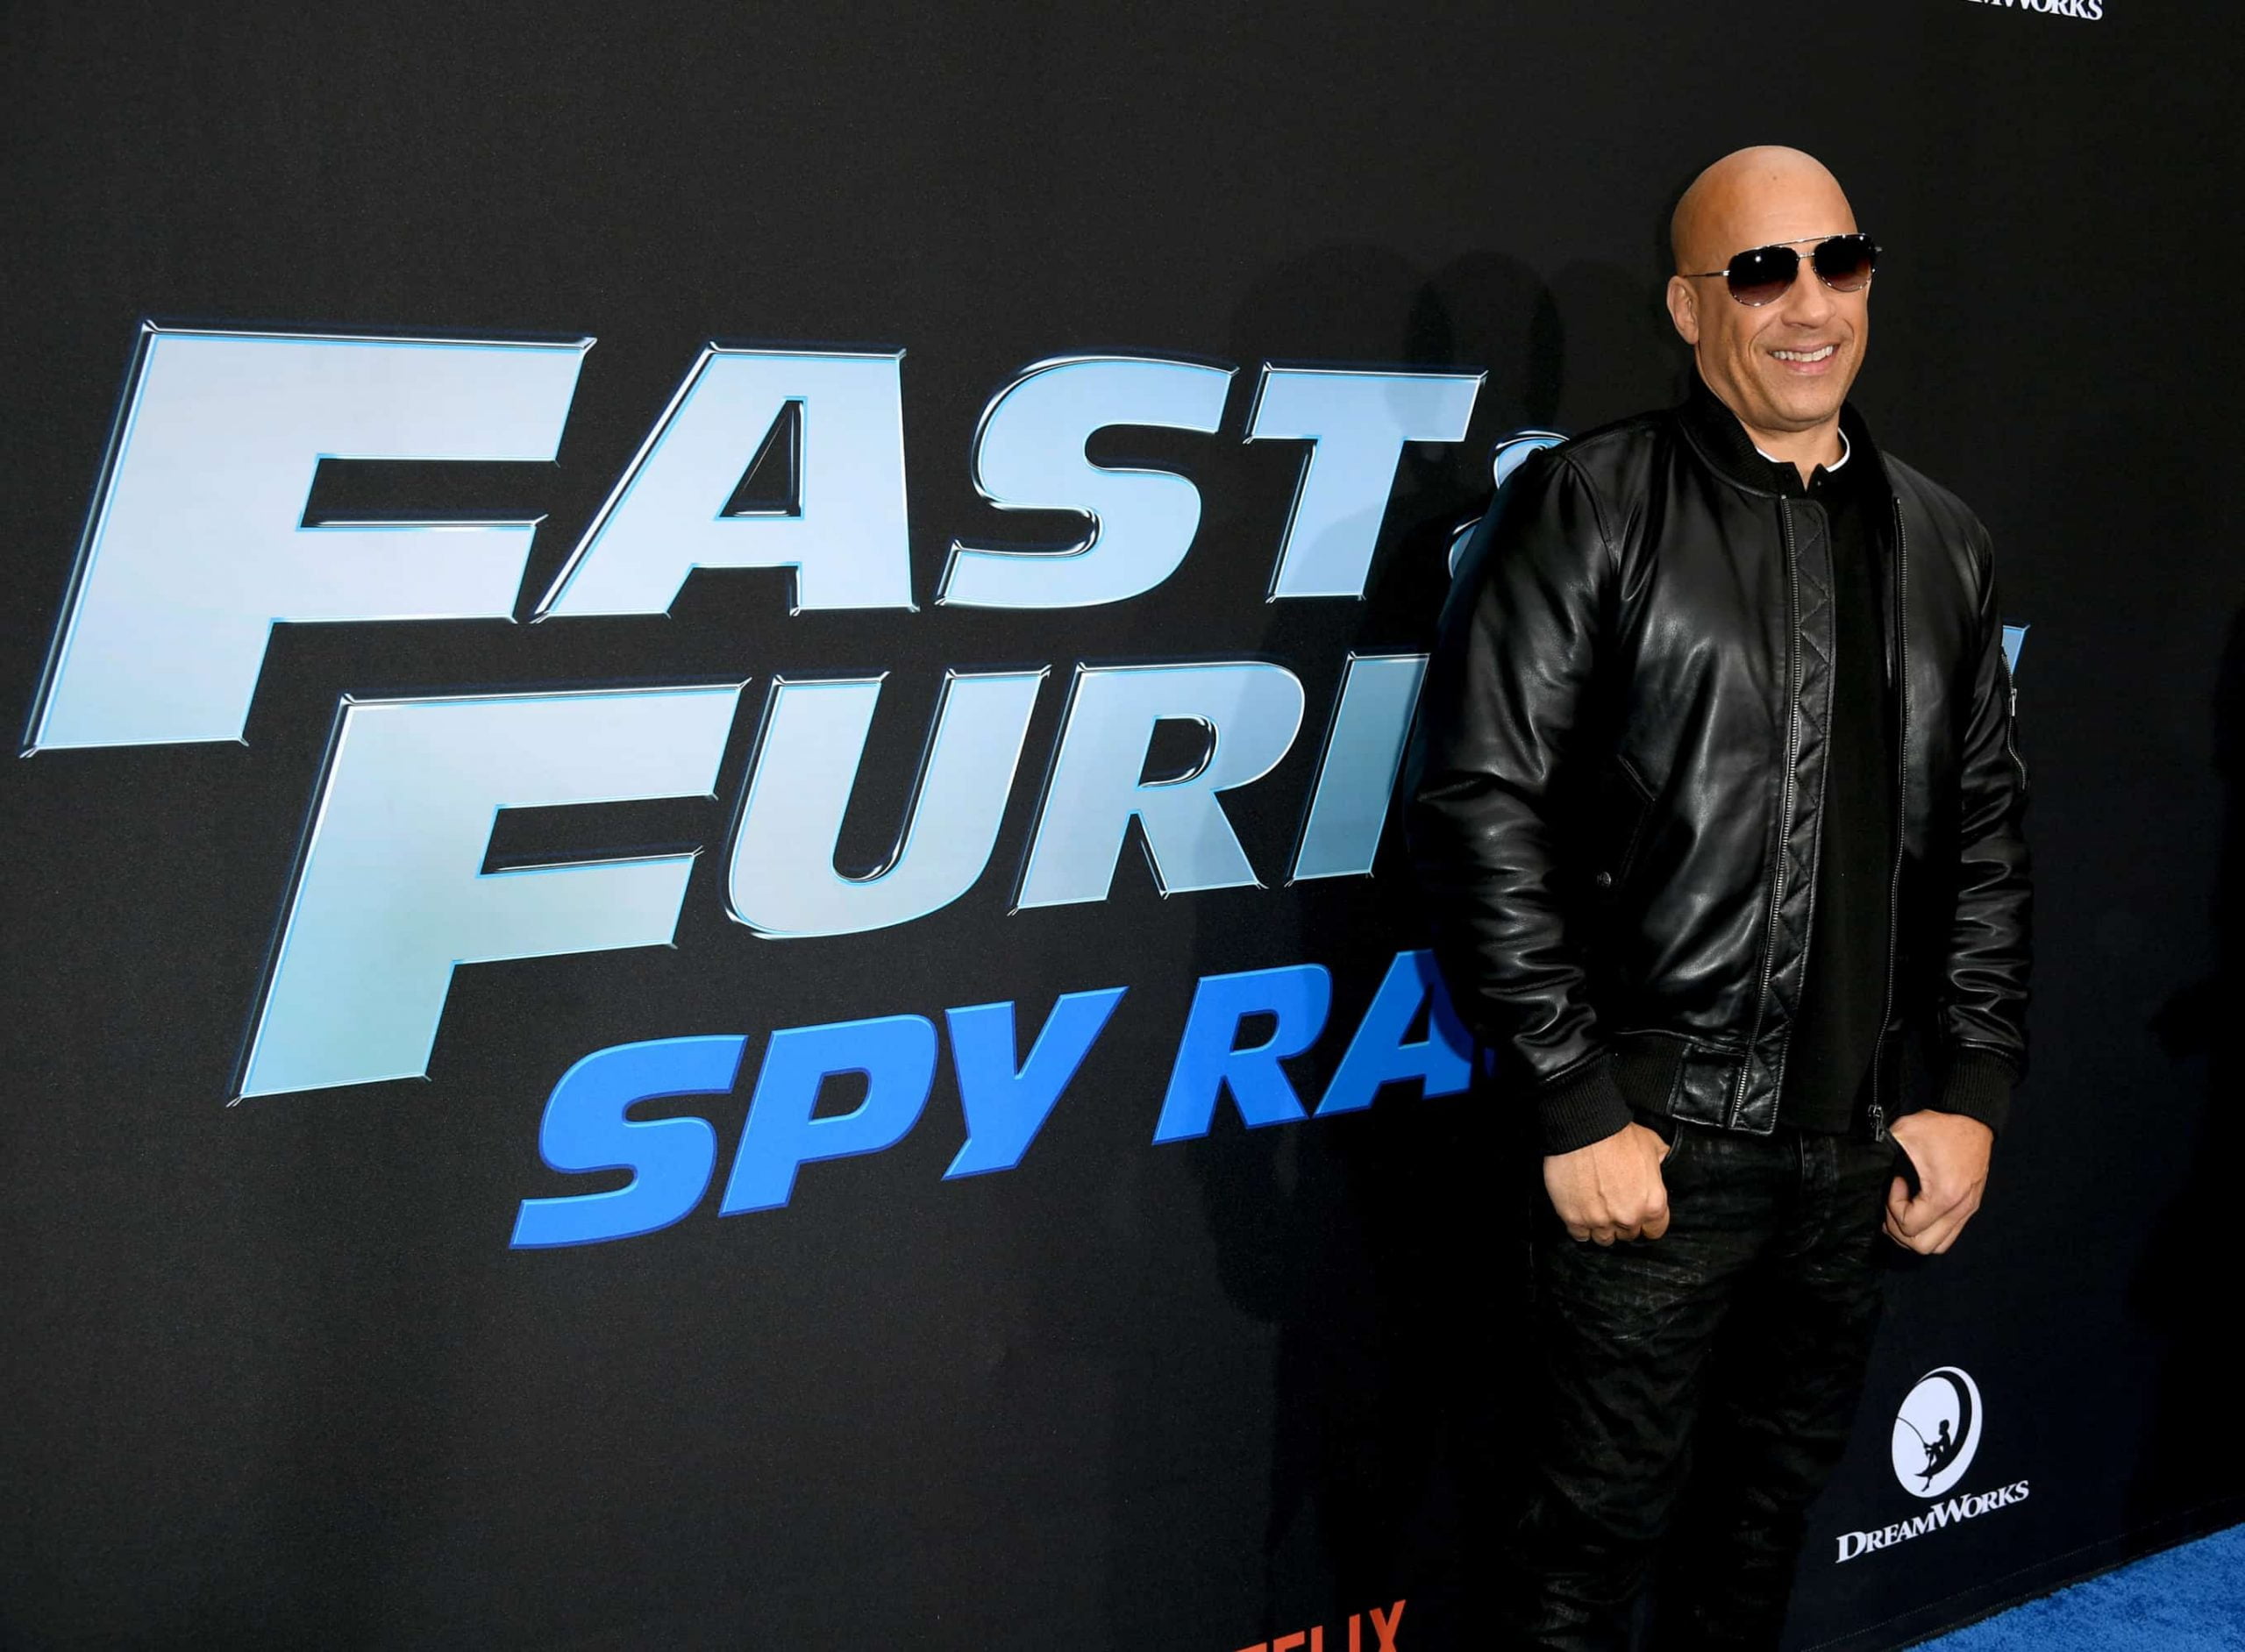 New Teaser Trailer Drops For The Upcoming 9th Installment In The ‘Fast & Furious’ Franchise